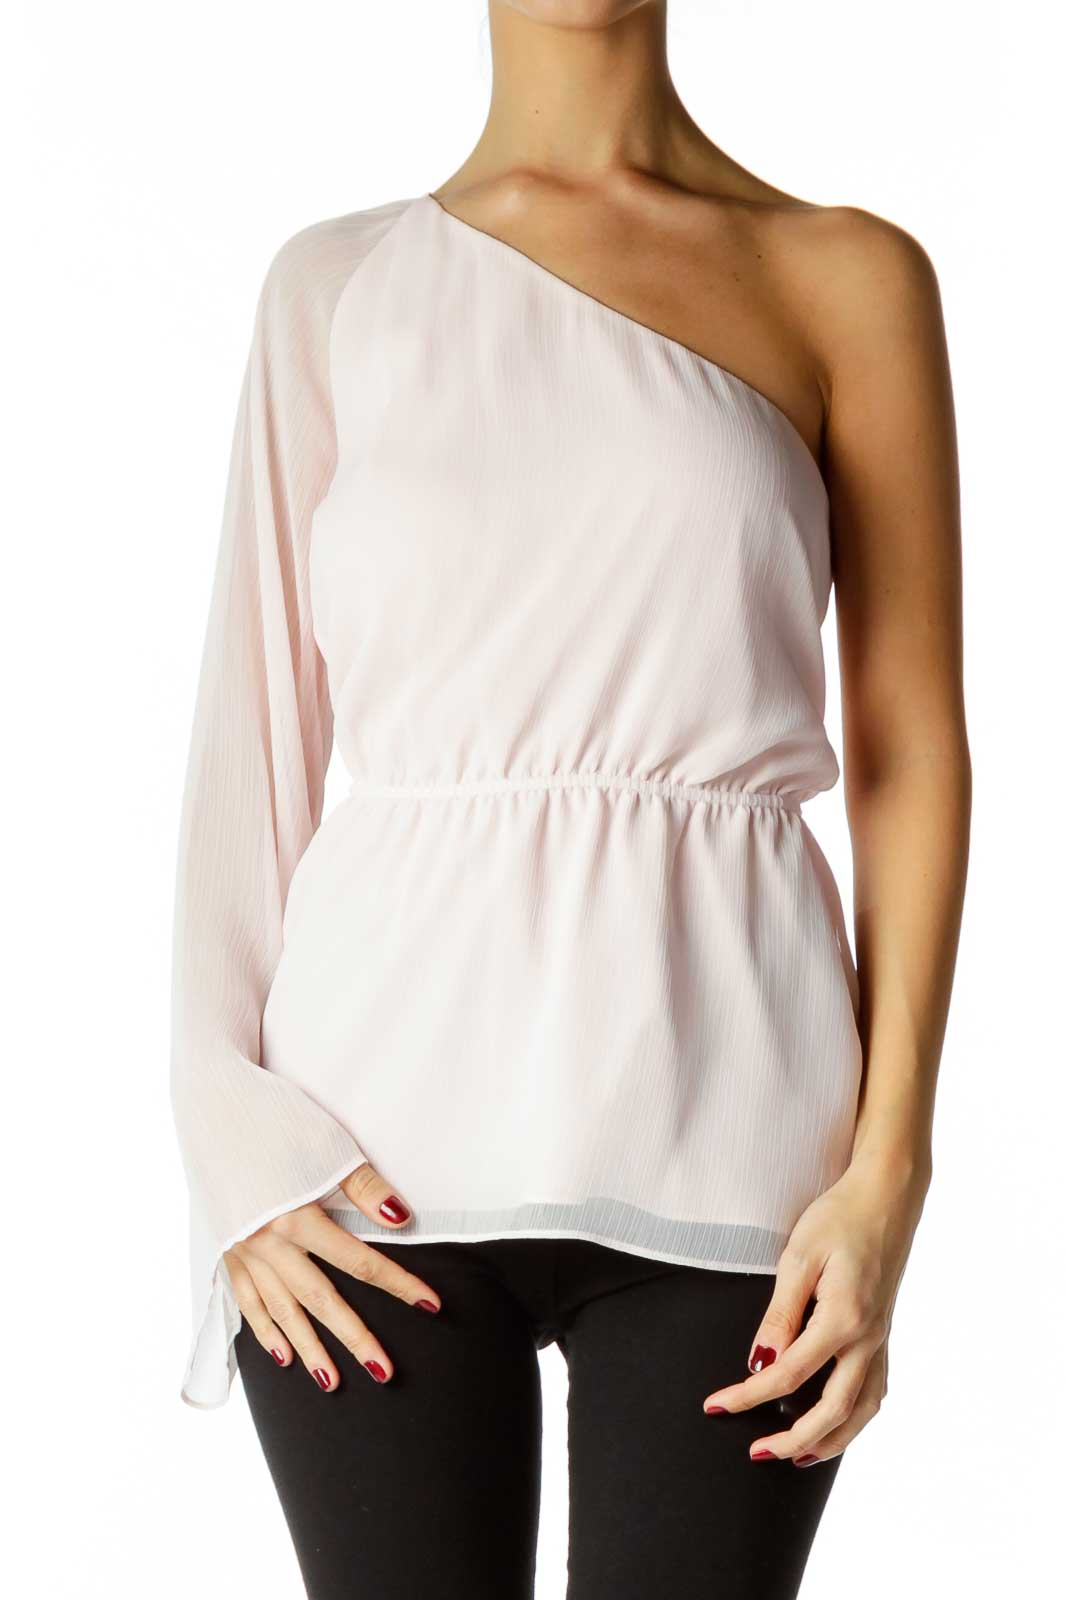 Pink One-Shoulder Chiffon Blouse Front